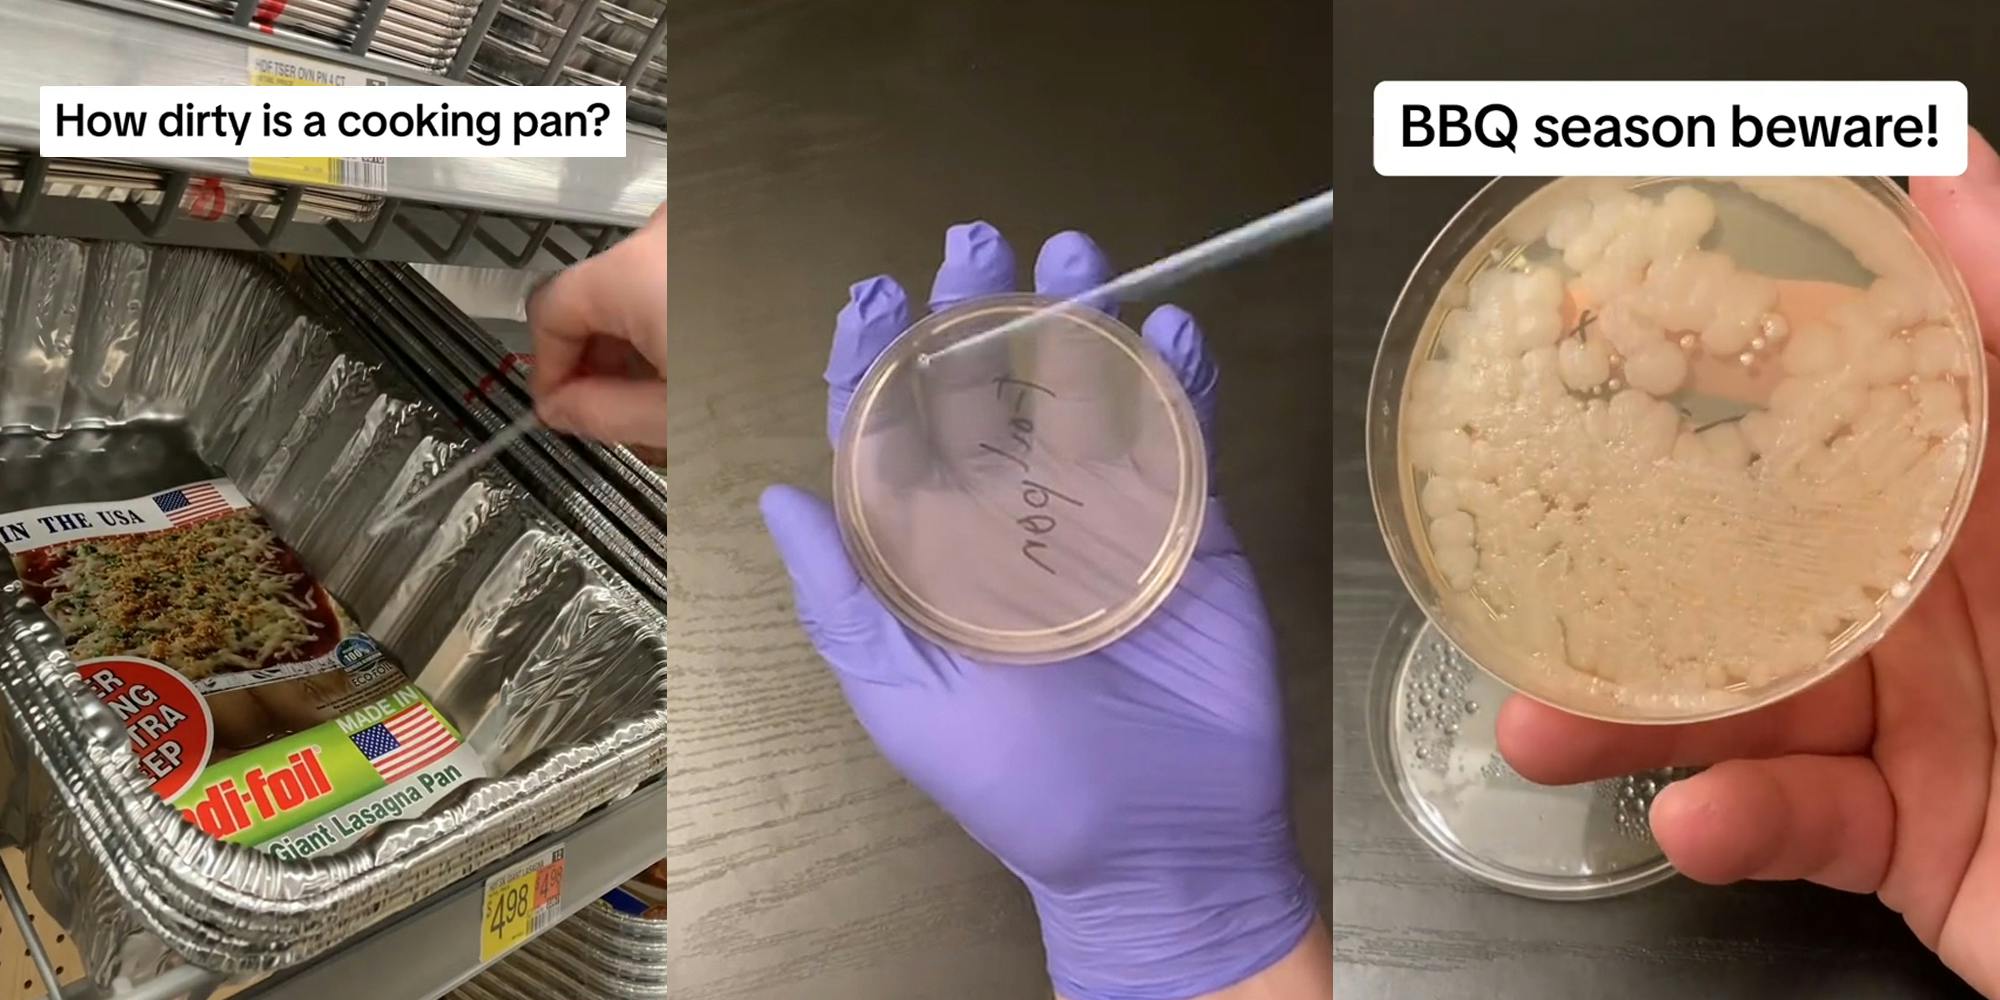 person swabbing cooking pan in store with caption "How dirty is a cooking pan?" (l) gloved hand swabbing inside petri dish c) petri dish with bacteria with caption "BBQ season beware!" (r)